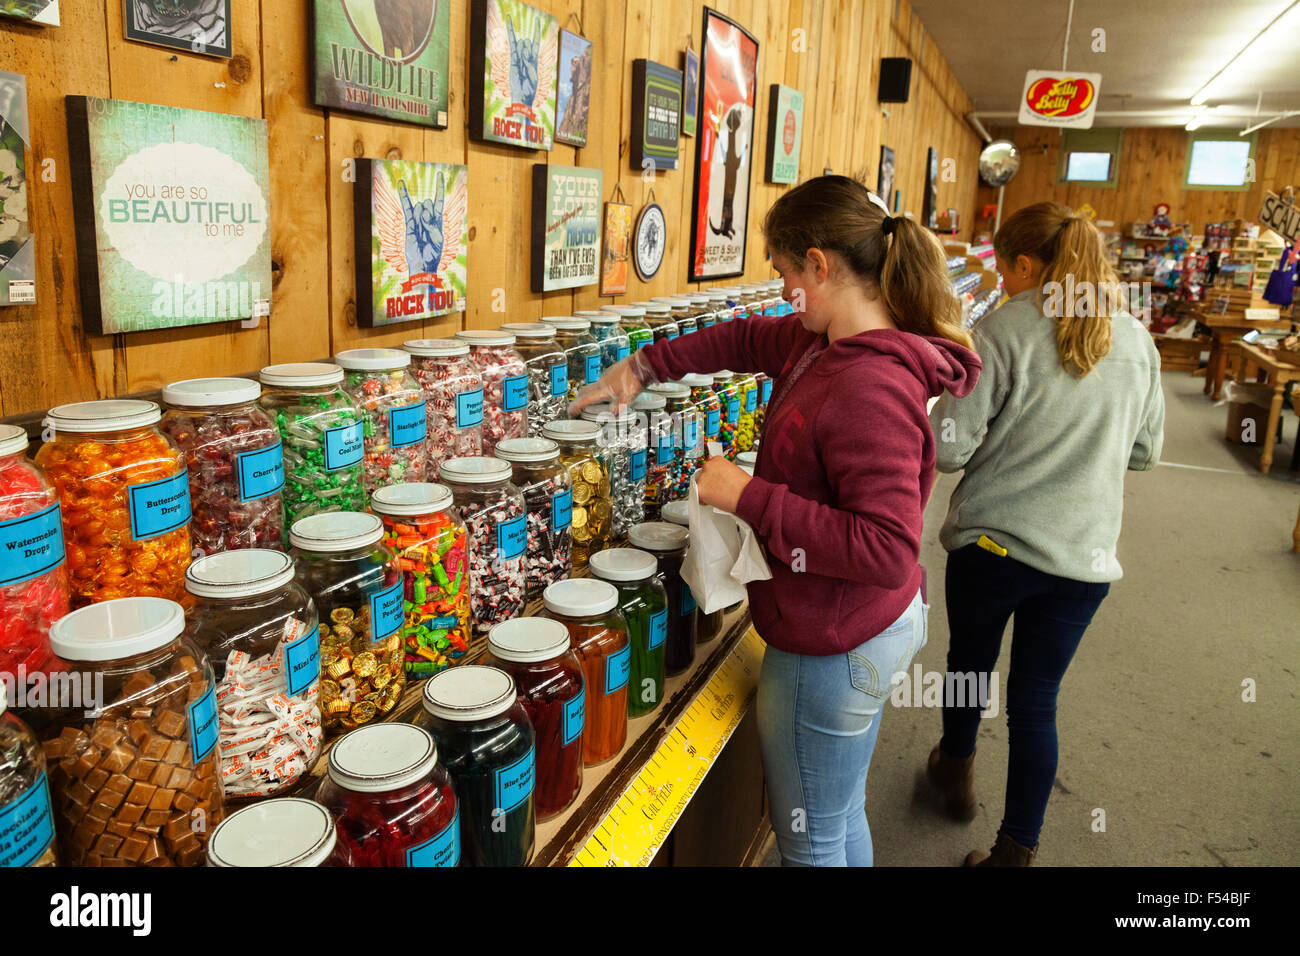 Teenagers shopping and buying sweets, Chutters candy store, Littleton, New Hampshire USA Stock Photo